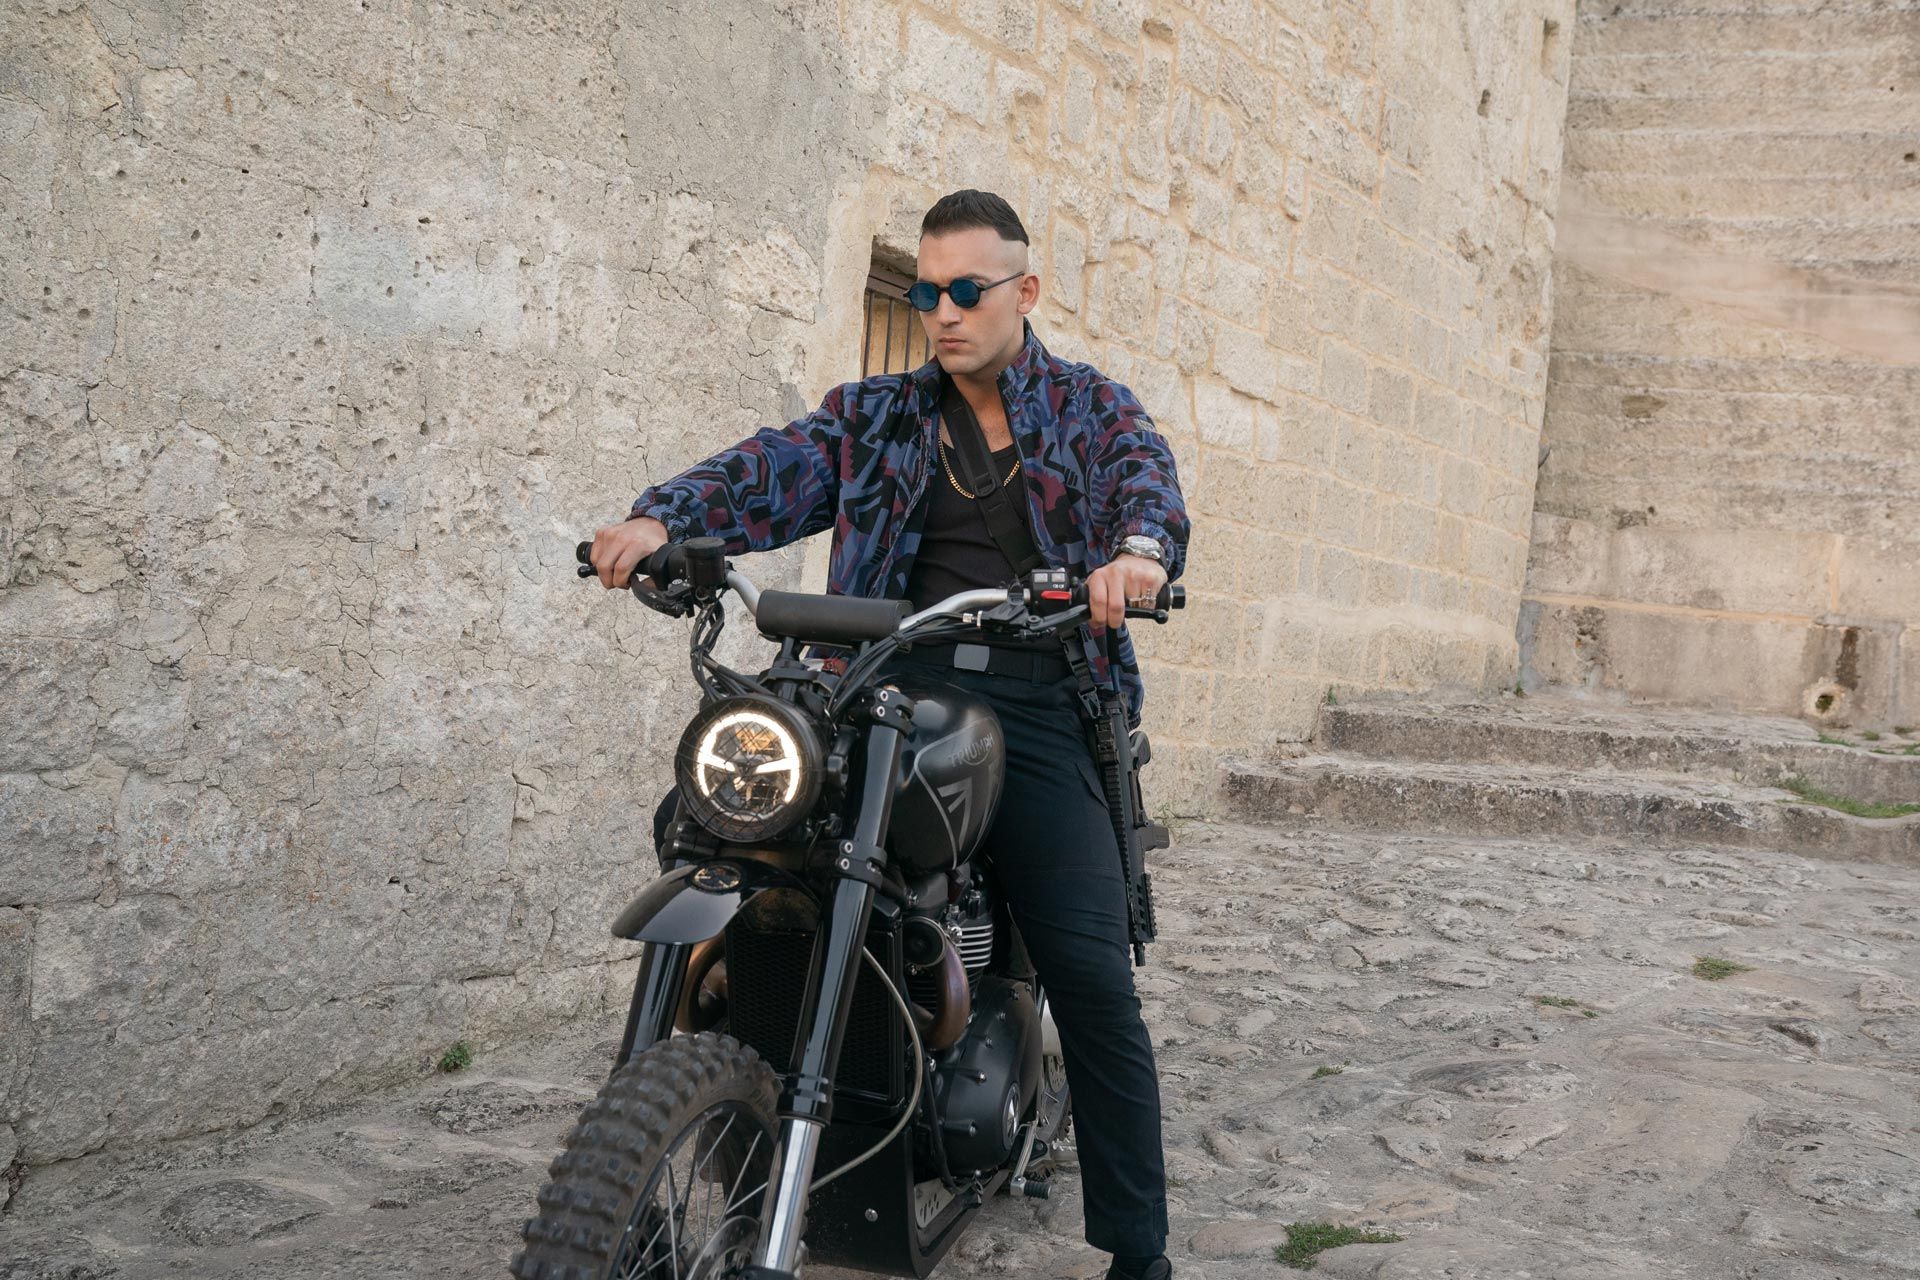 This is a henchman named Primo riding a Triumph Scrambler 1200 XE in Matera Italy during No Time To Die